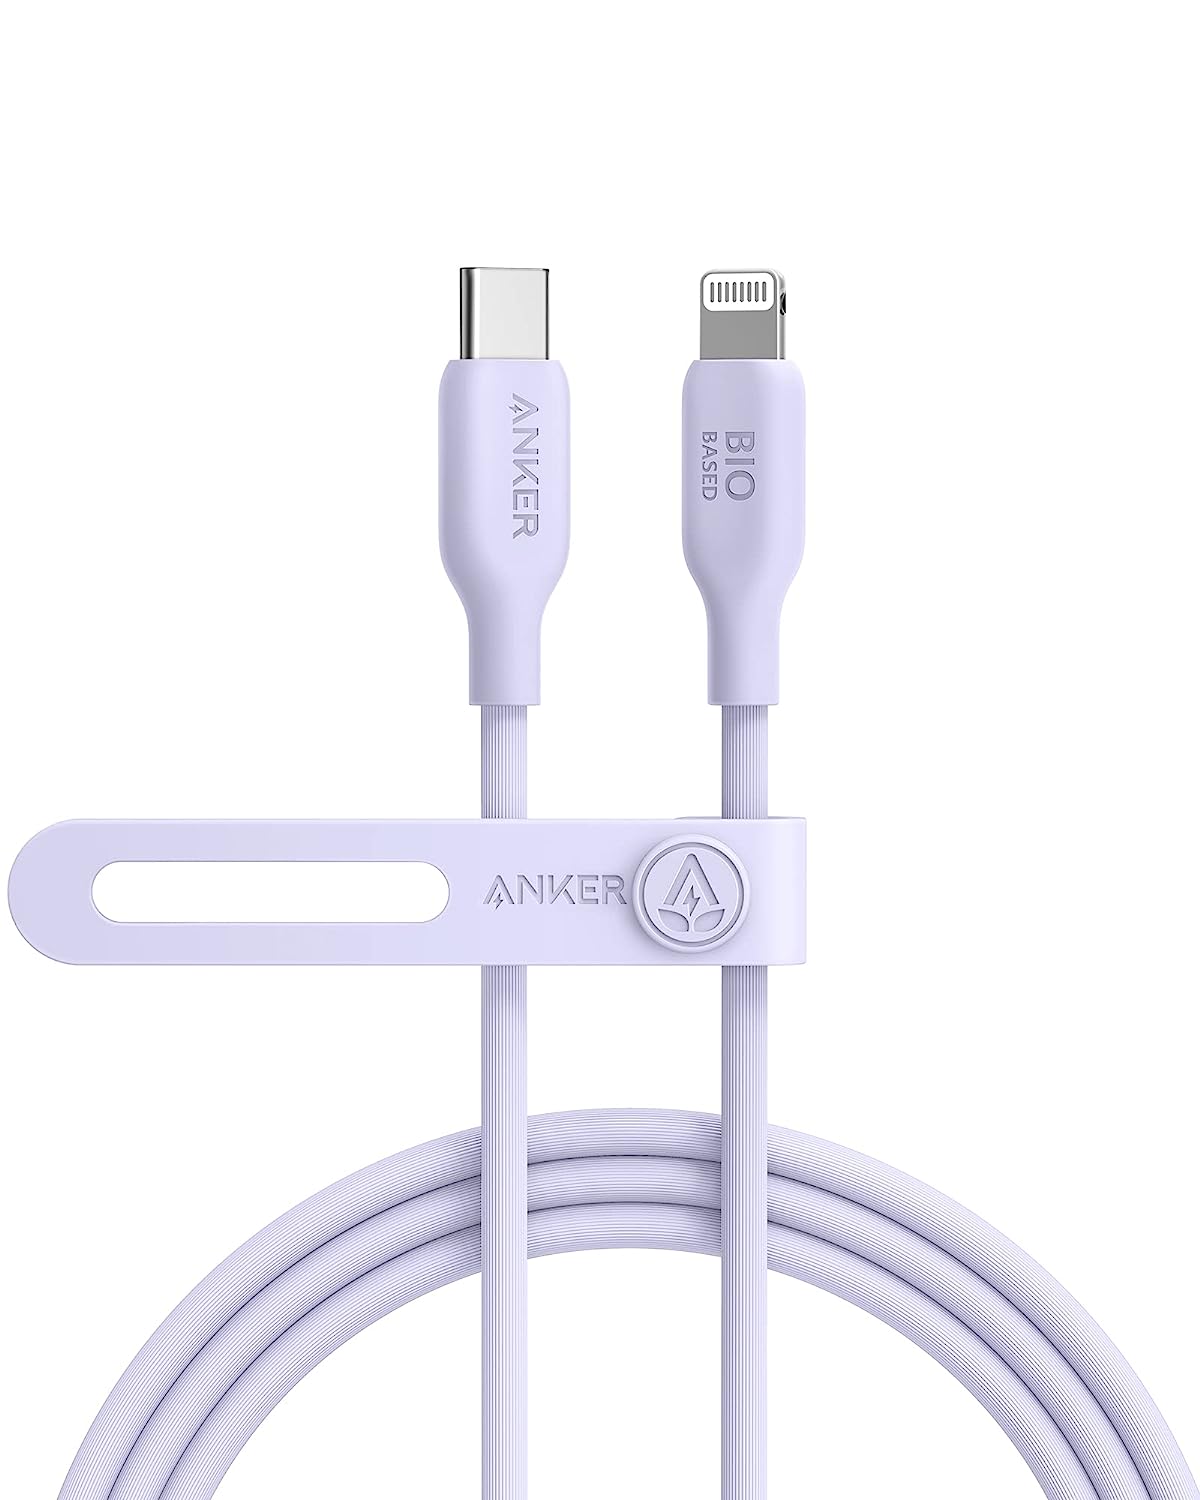 Anker USB-C to Lightning Cable, 541 Cable (Lilac [...]